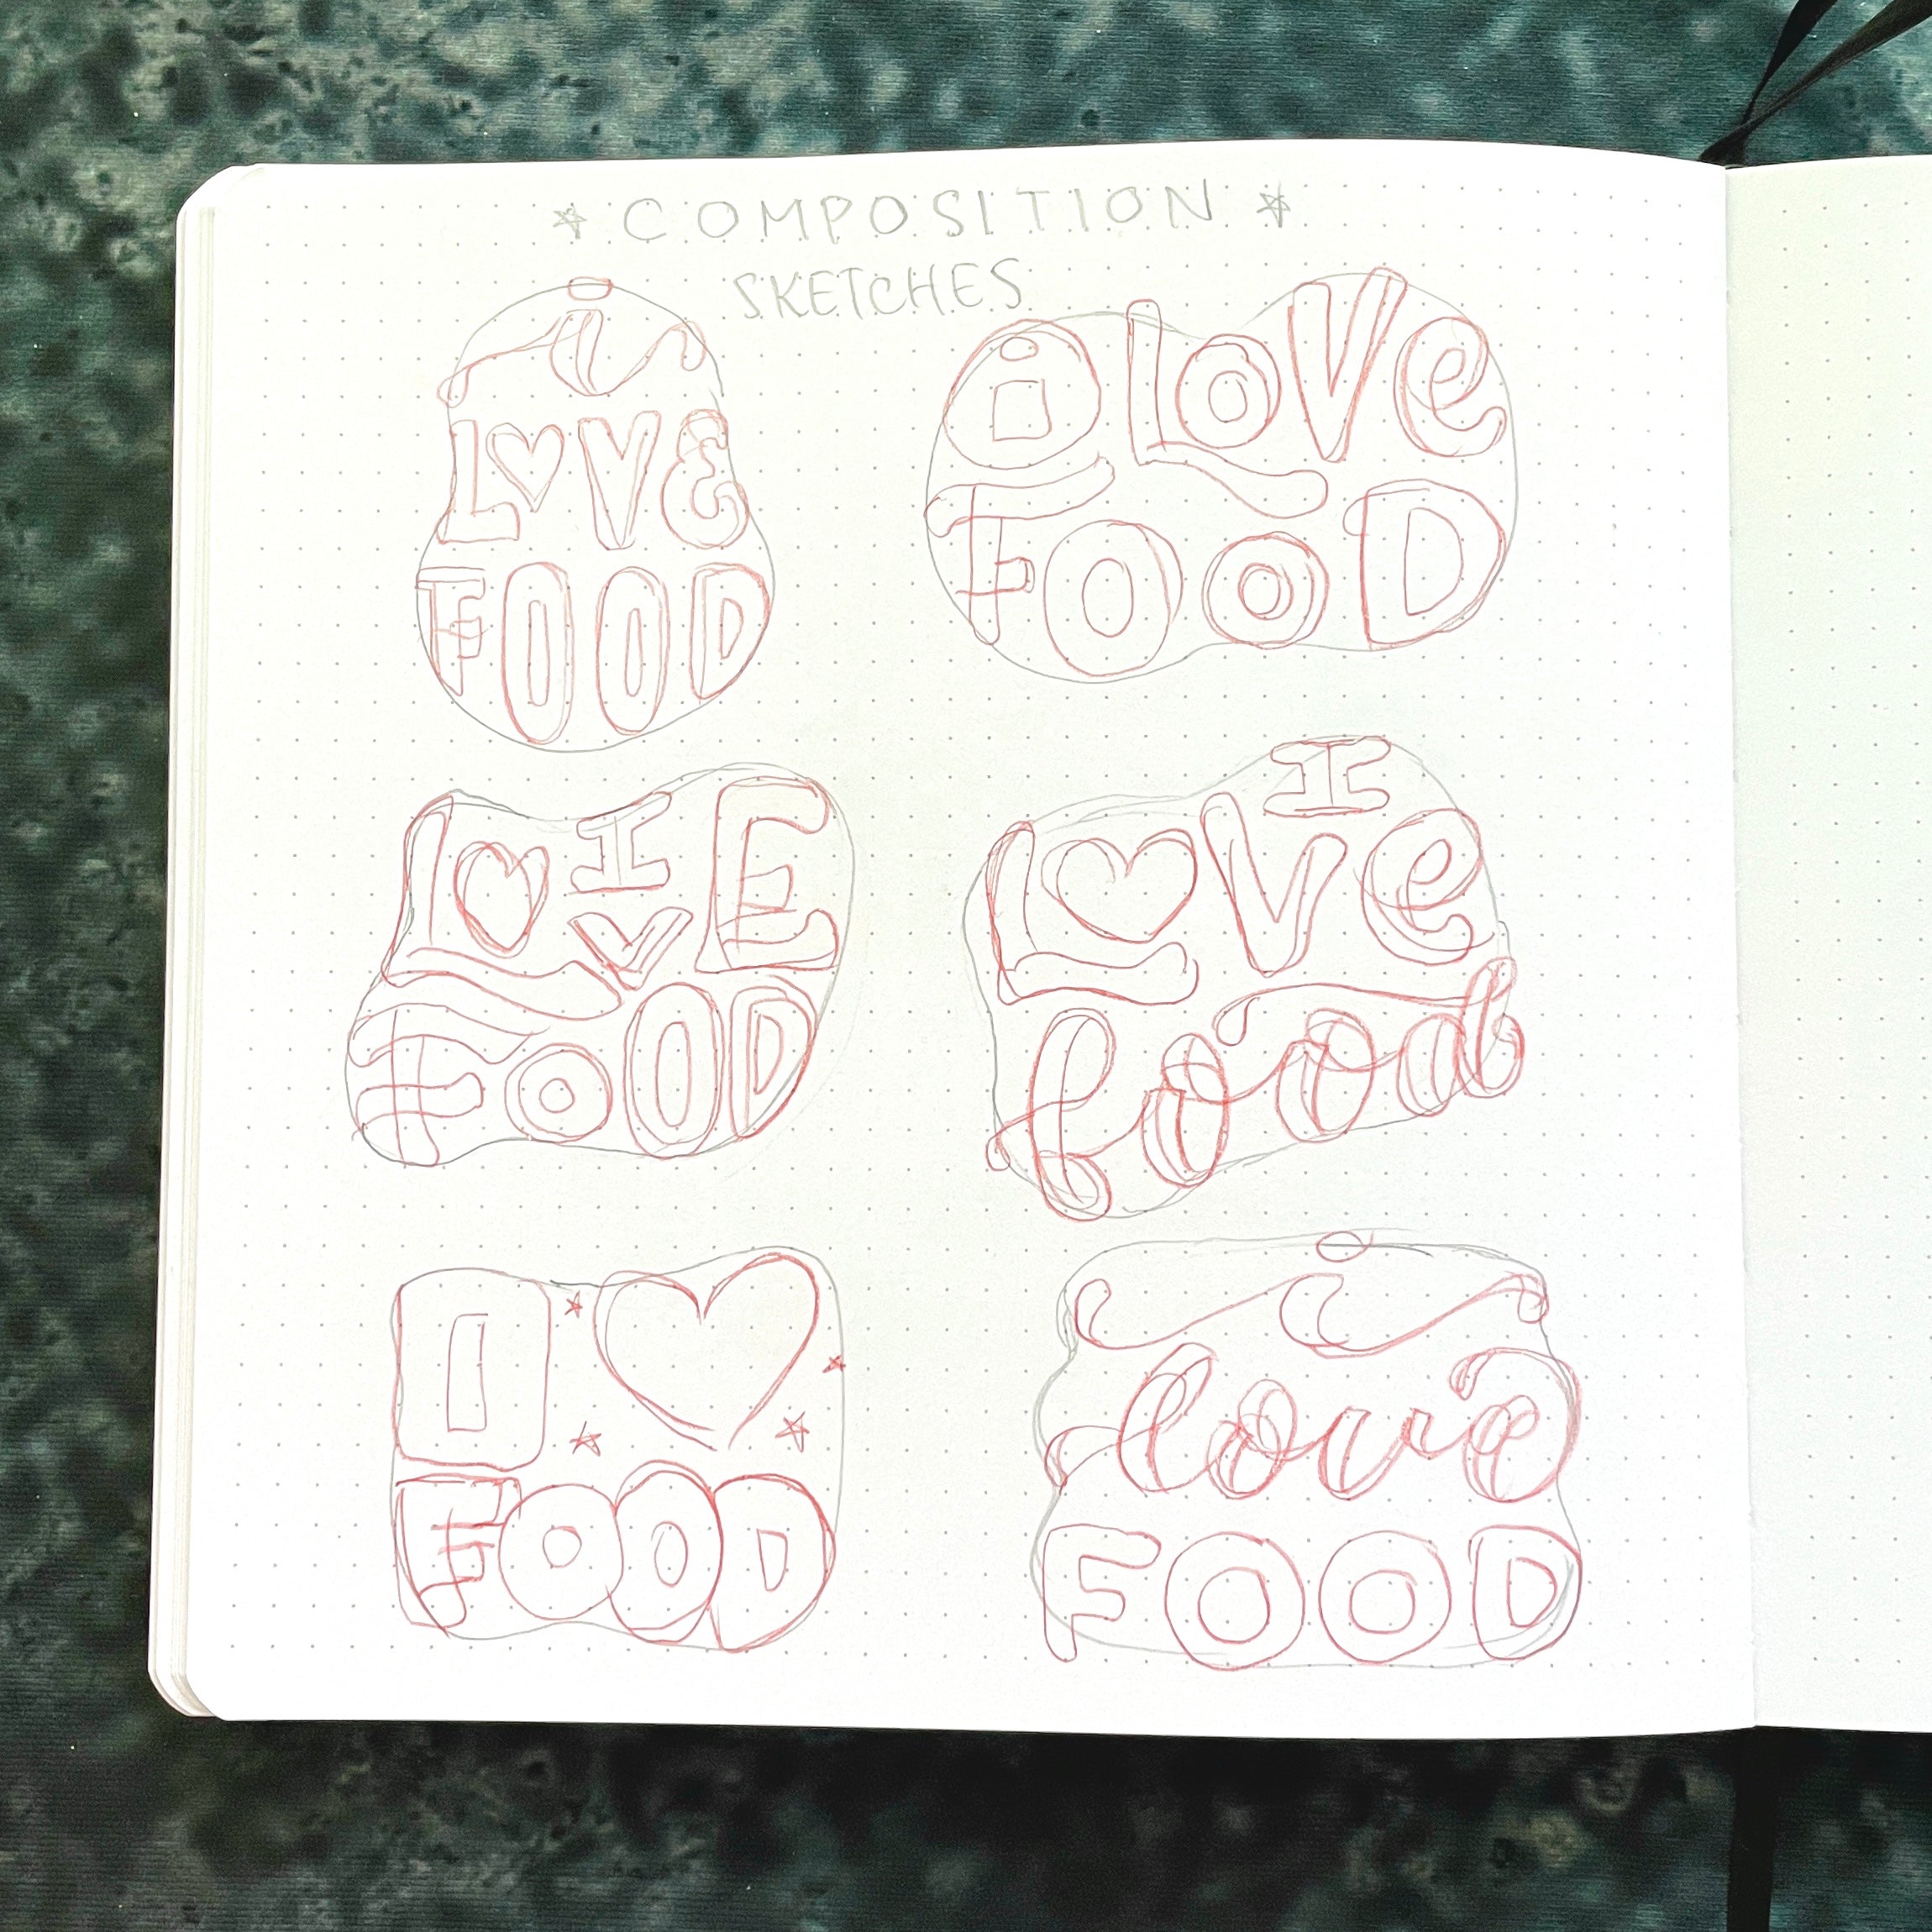 six different compositions for "I Love Food"